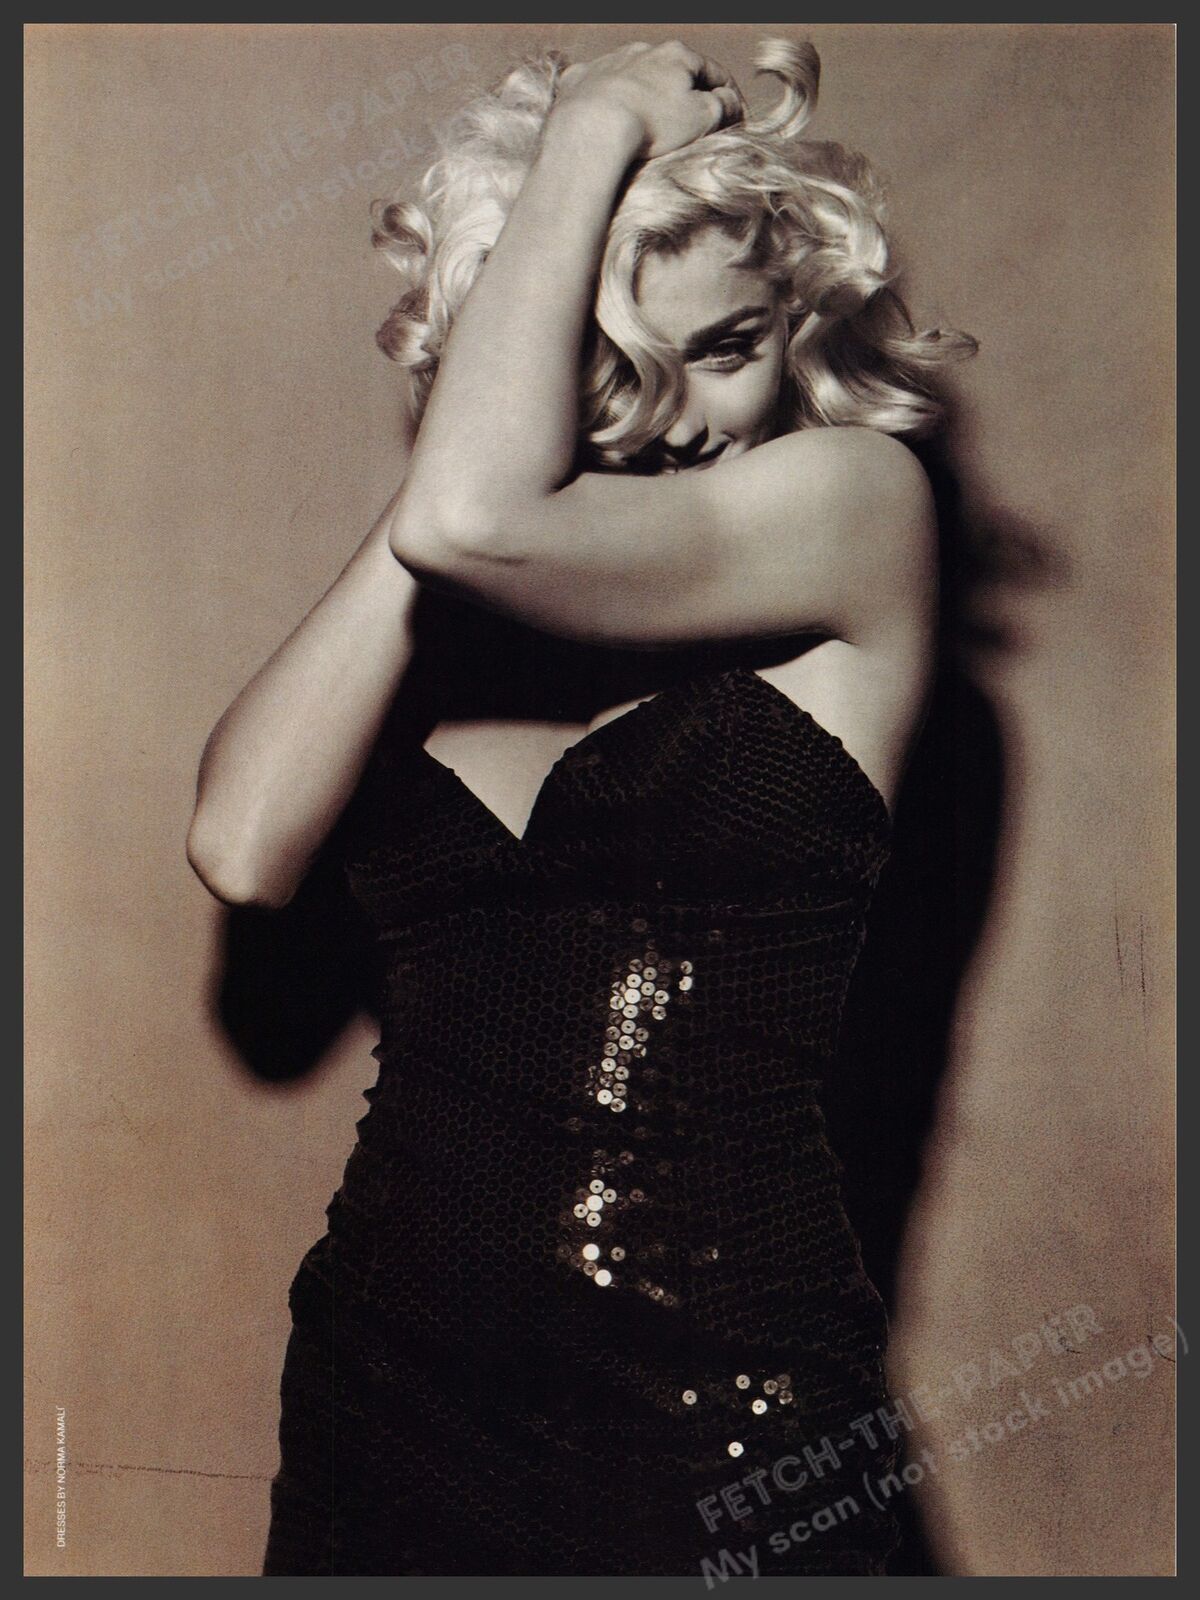 Madonna Magazine Article Photo 1990s Clipped 1991 Sexy Blonde Hair Black Dress